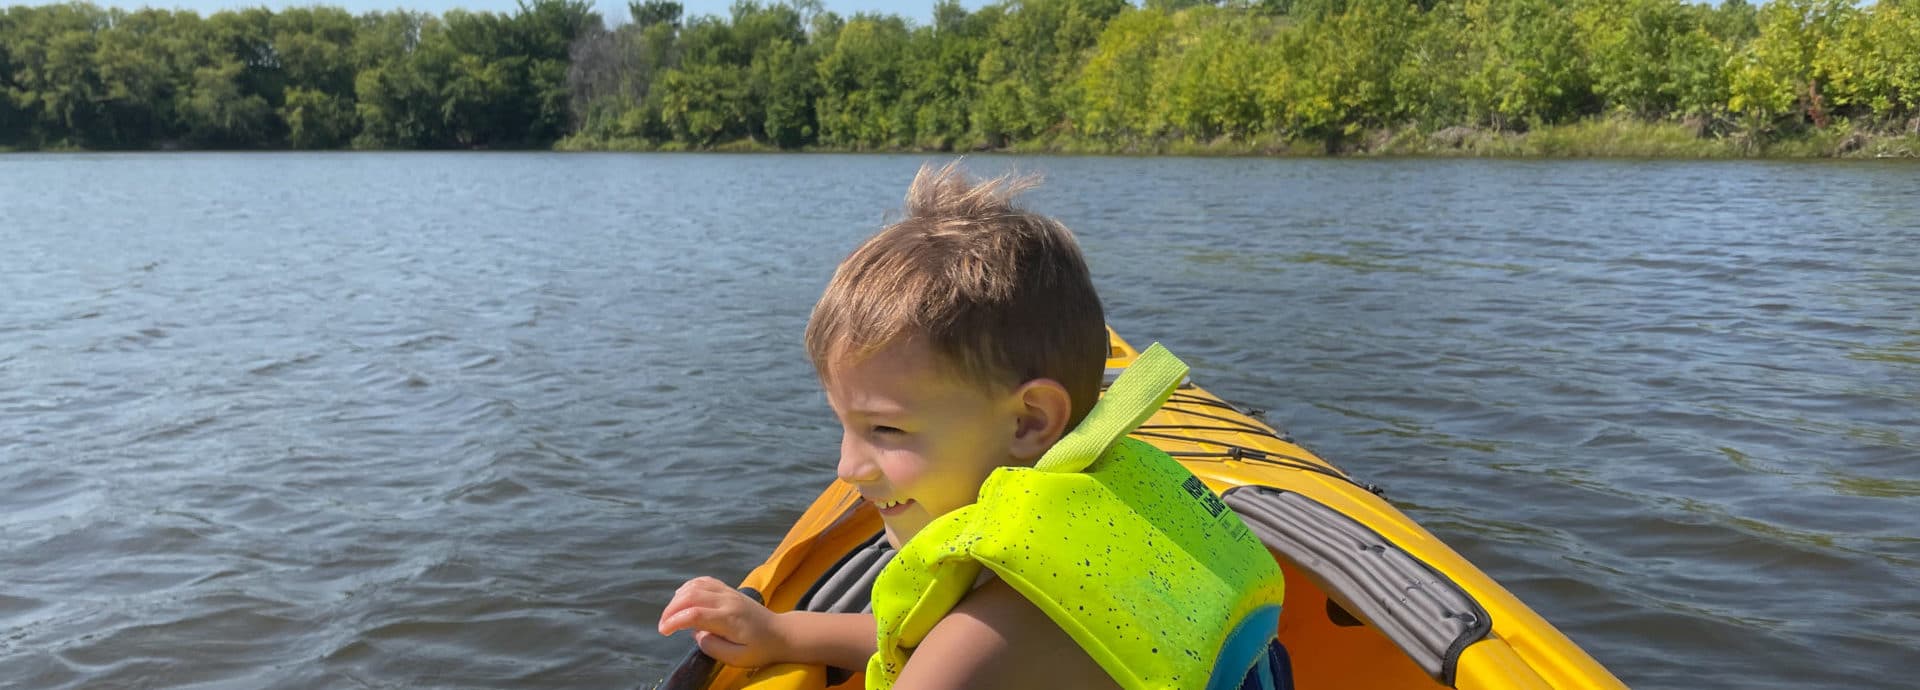 Child in kayak looking at water